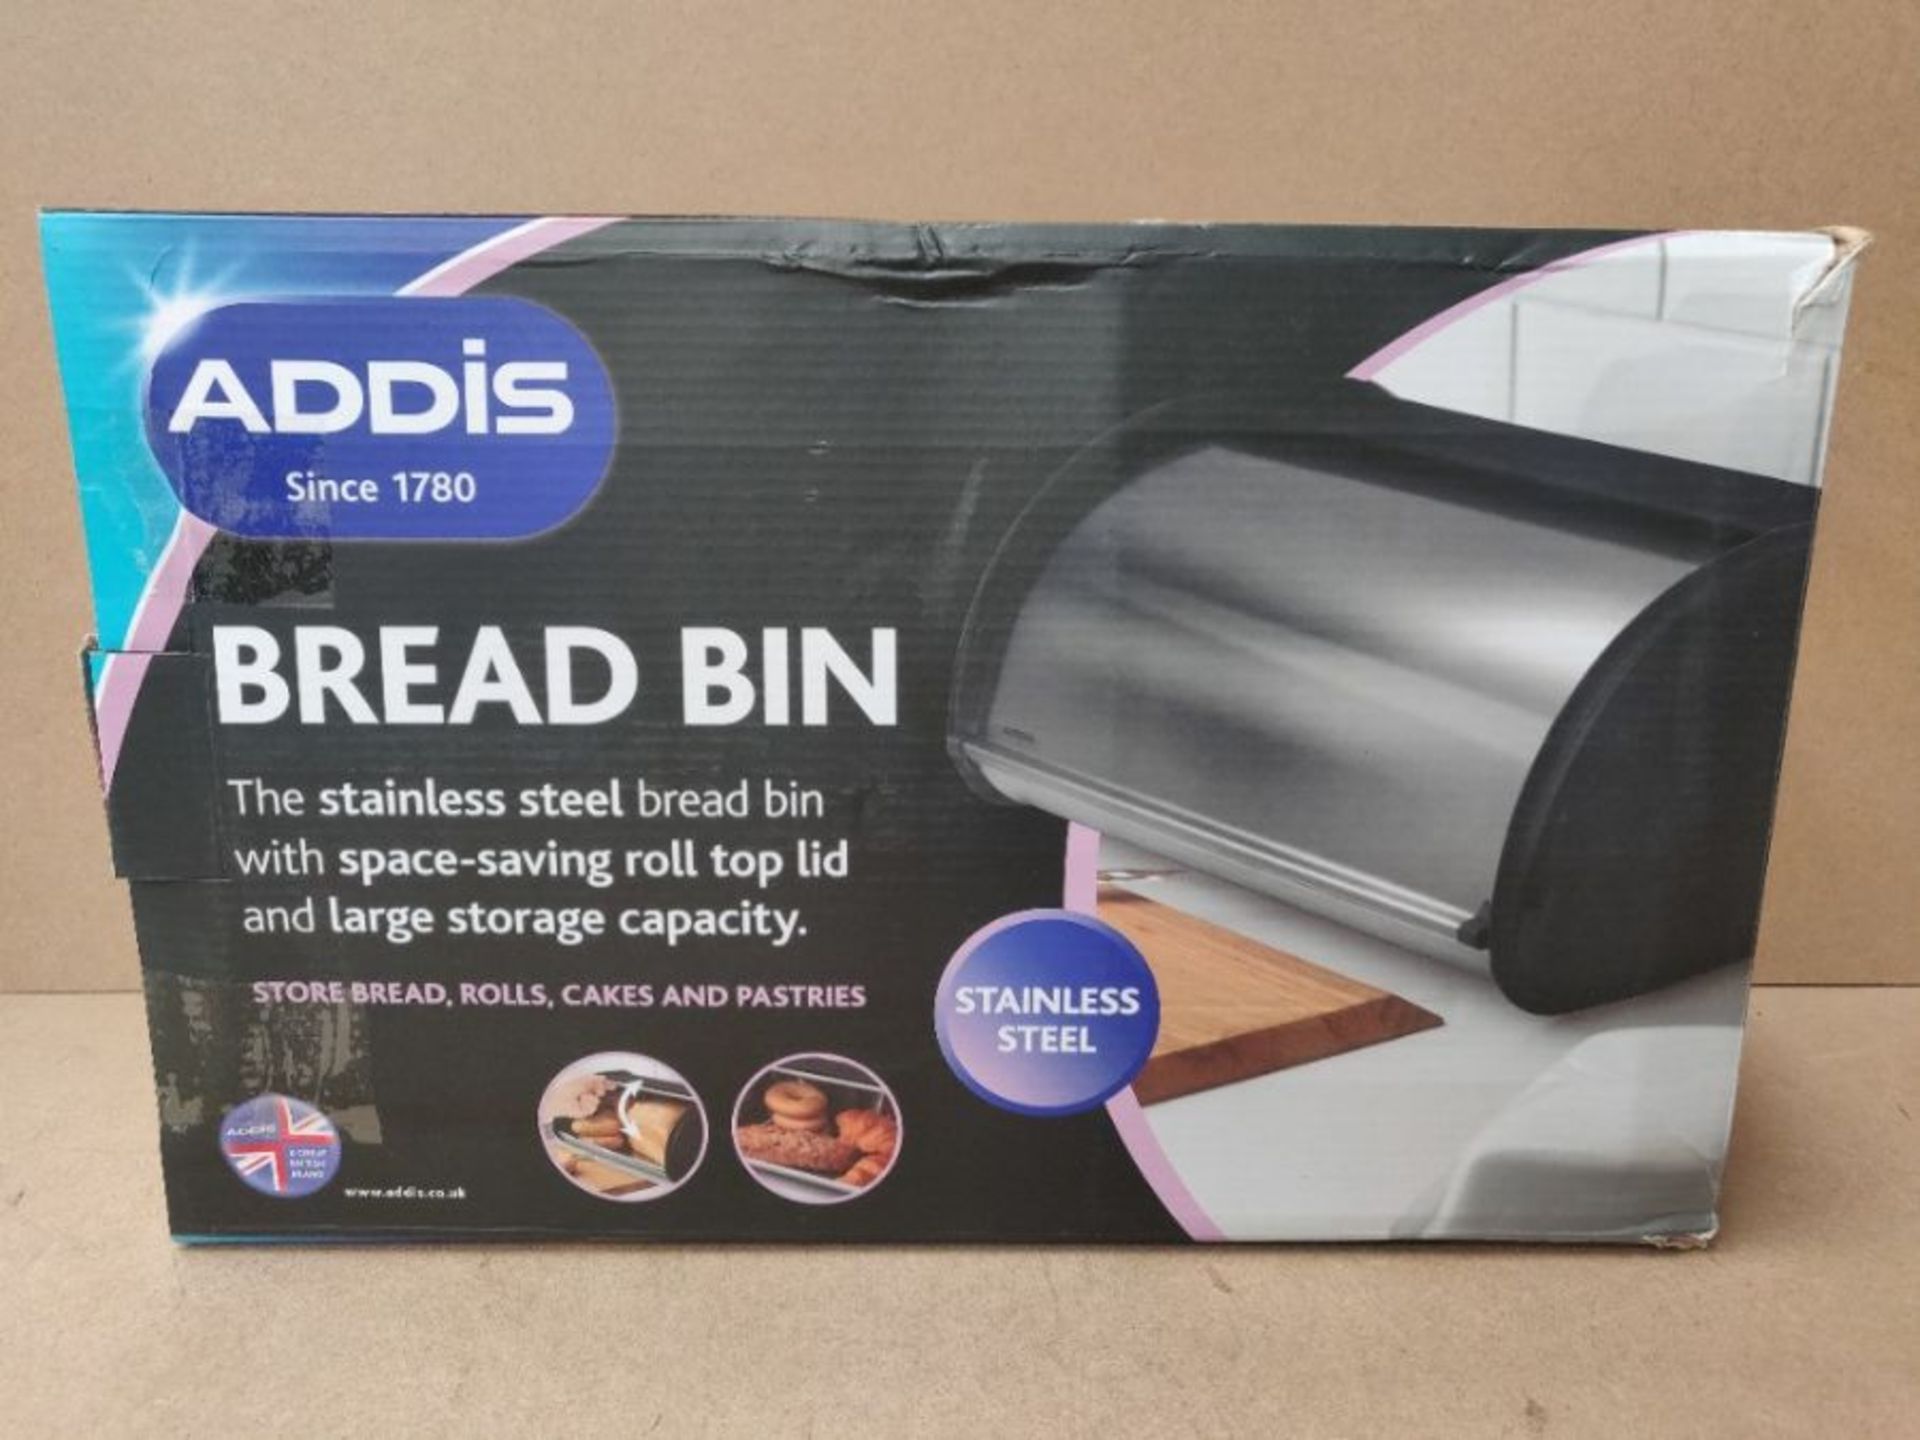 Addis 508451 Deluxe Bread Bin-Stainless Steel, 22L - Image 2 of 3